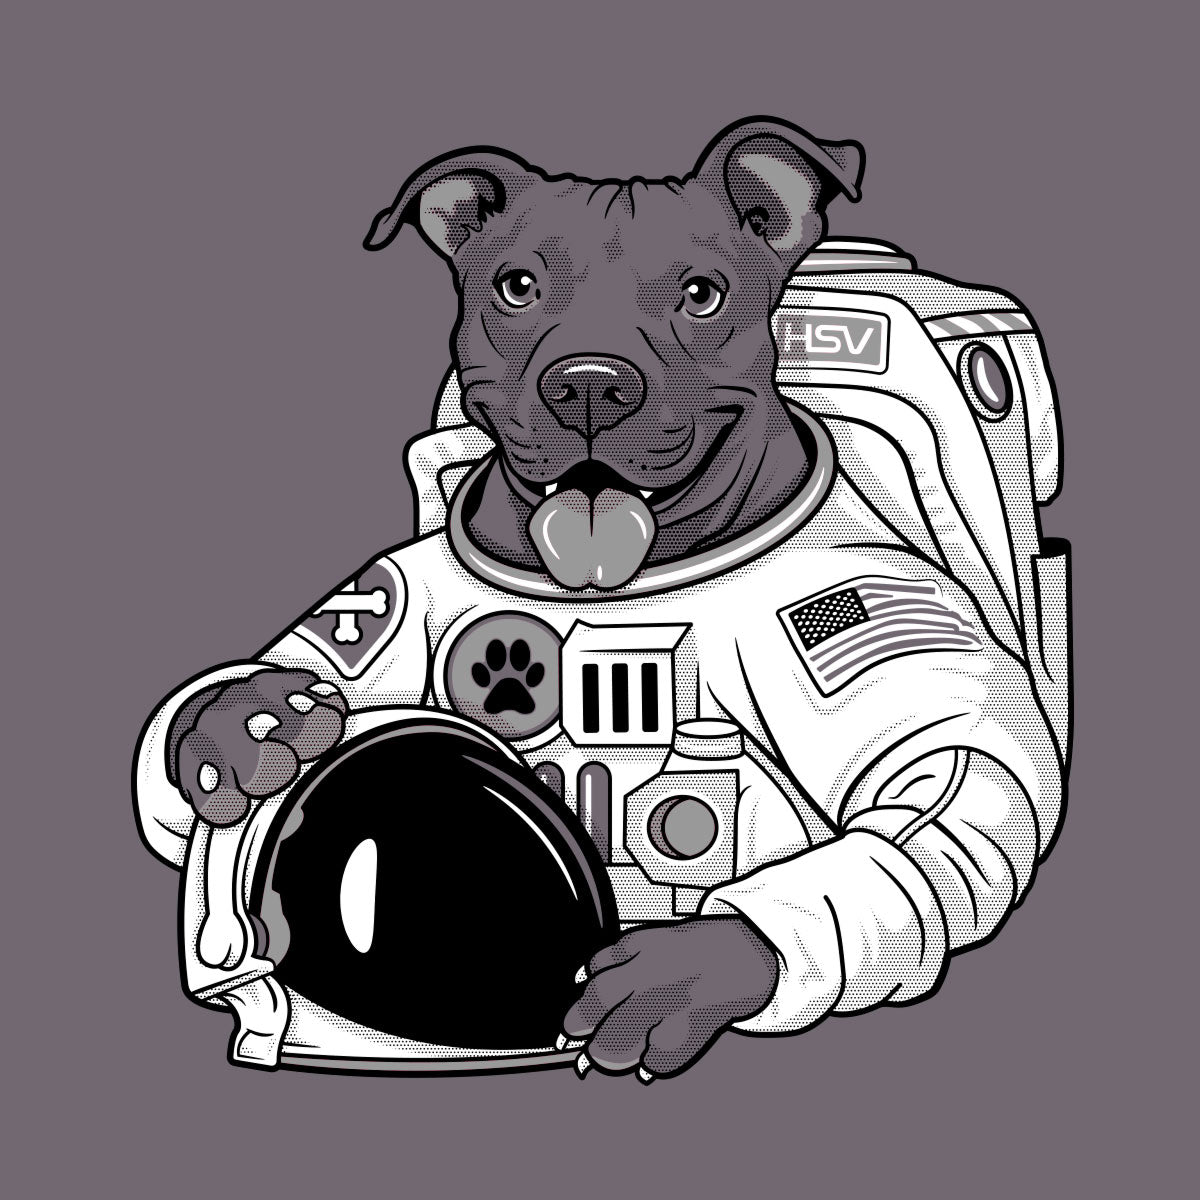 Thumbnail of pit bull mix dog dressed as astronaut design on gray